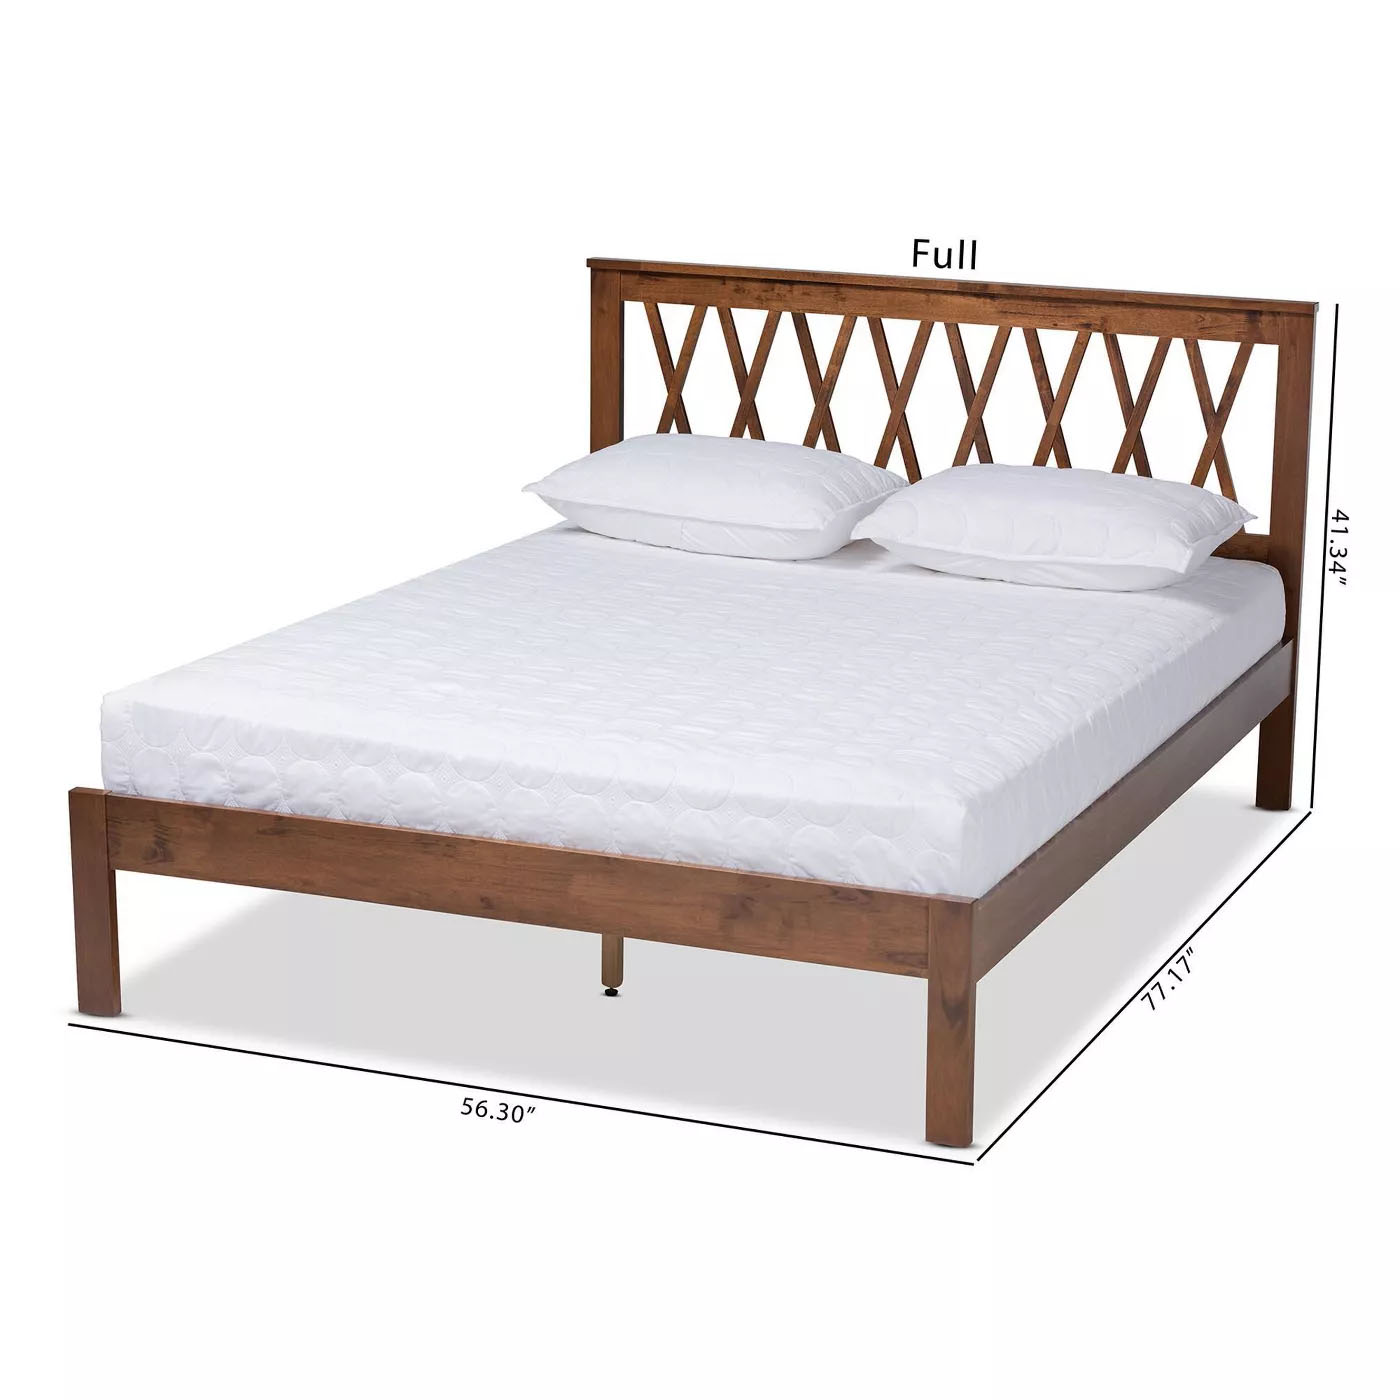 contemporary full size bed